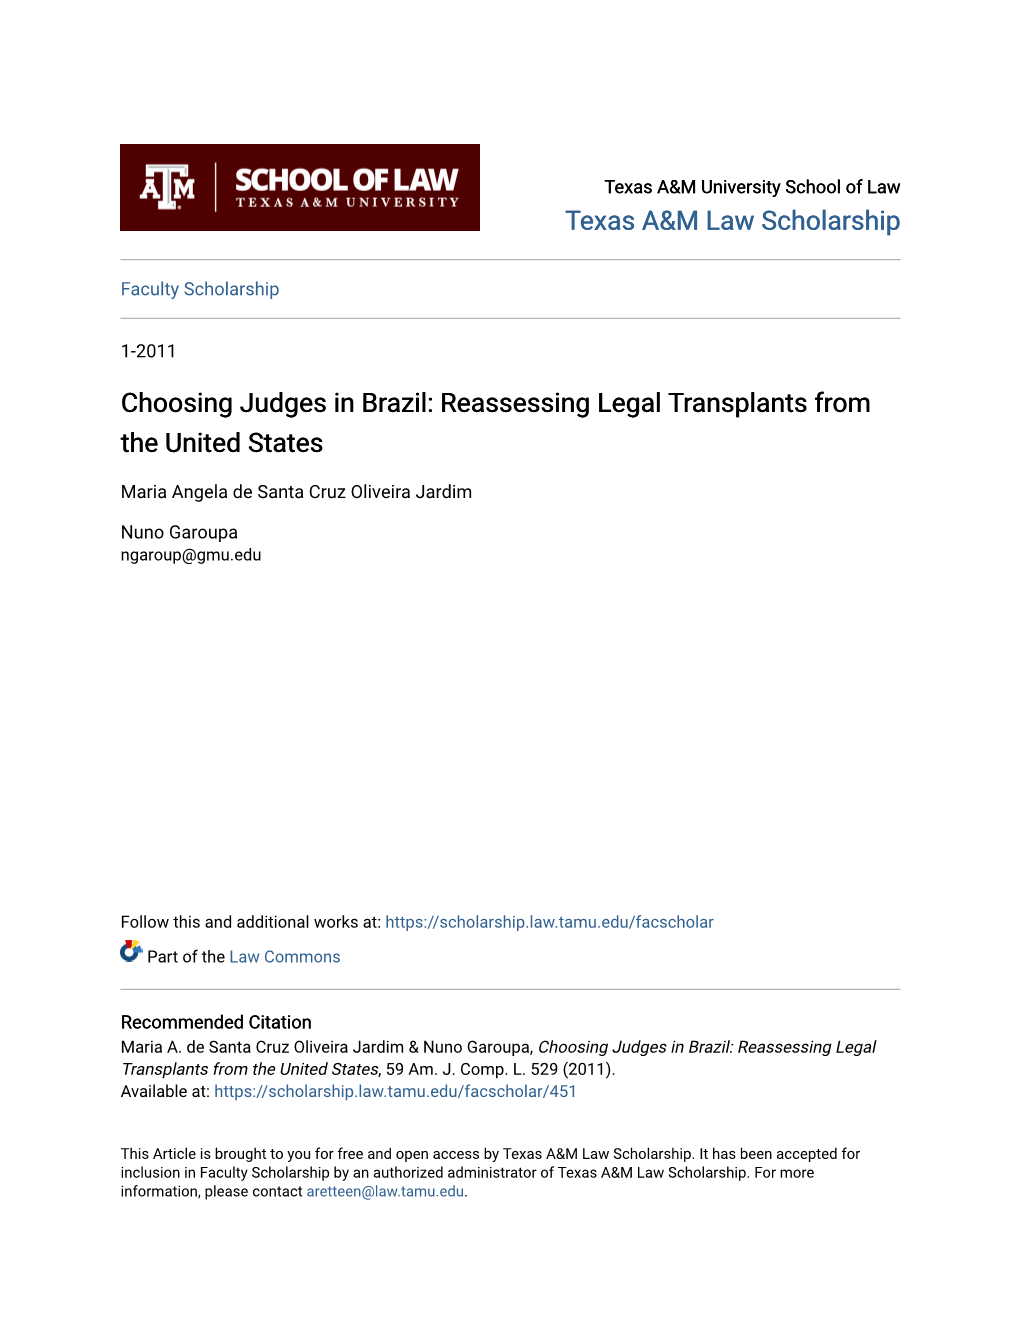 Choosing Judges in Brazil: Reassessing Legal Transplants from the United States